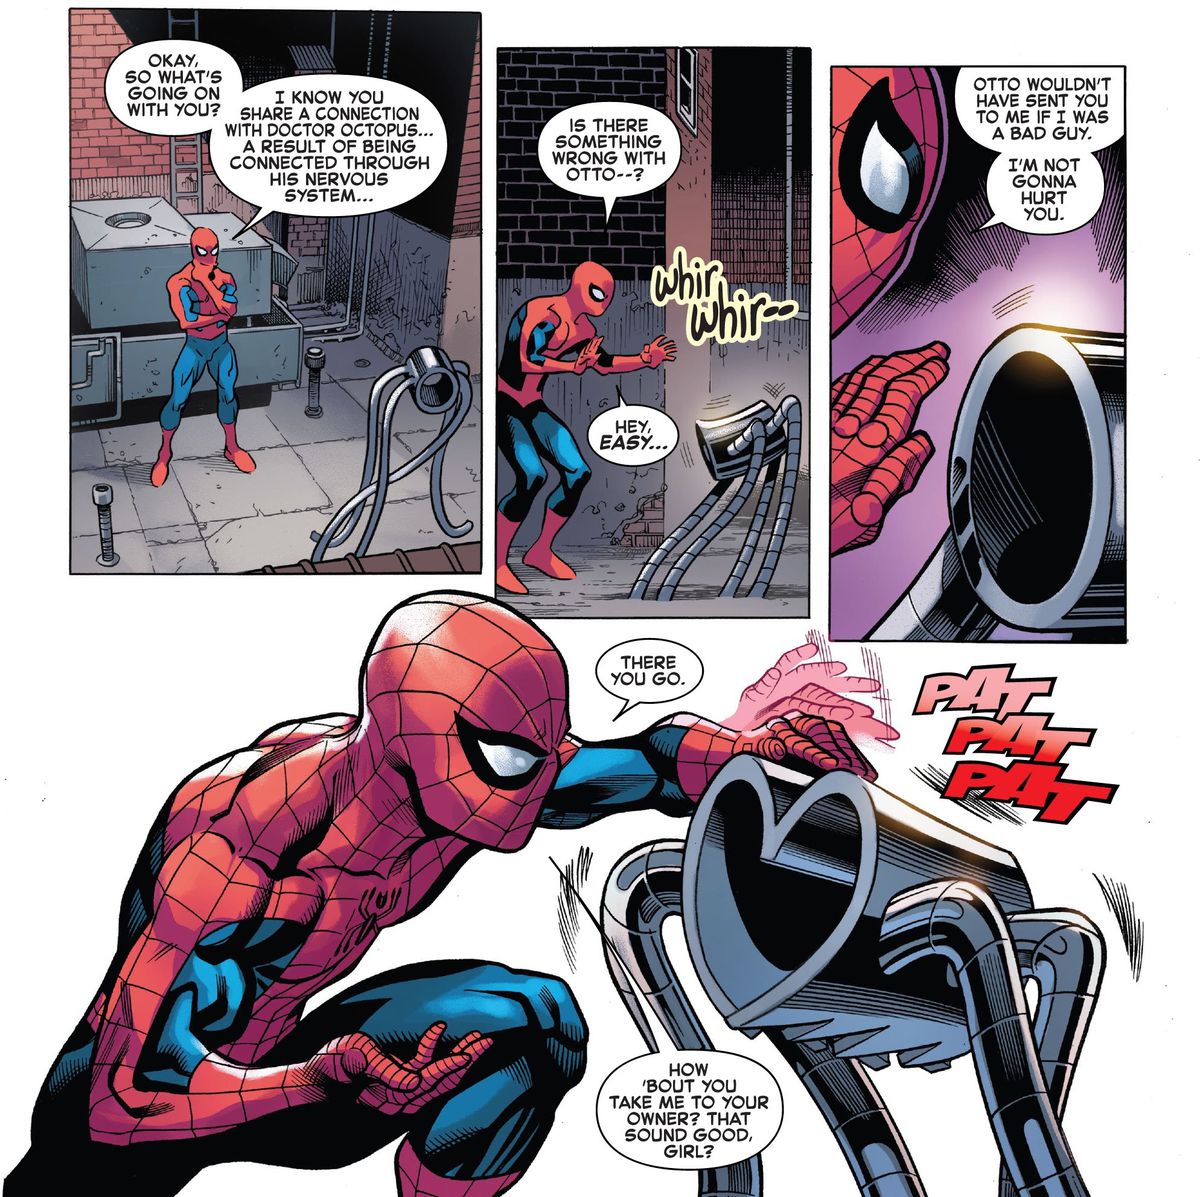 “Hey, easy,” Spider-Man approaches the four hesitant metal arms of Doctor Octopus, which are walking on all fours like a dog, with the waistband as torso. “There you go,” Spider-Man pets its “back” and it leans into him, curving its middle into a heart shape. “How ‘bout you take me to you owner? That sound good, girl?” From Amazing Spider-Man #6 (2022).